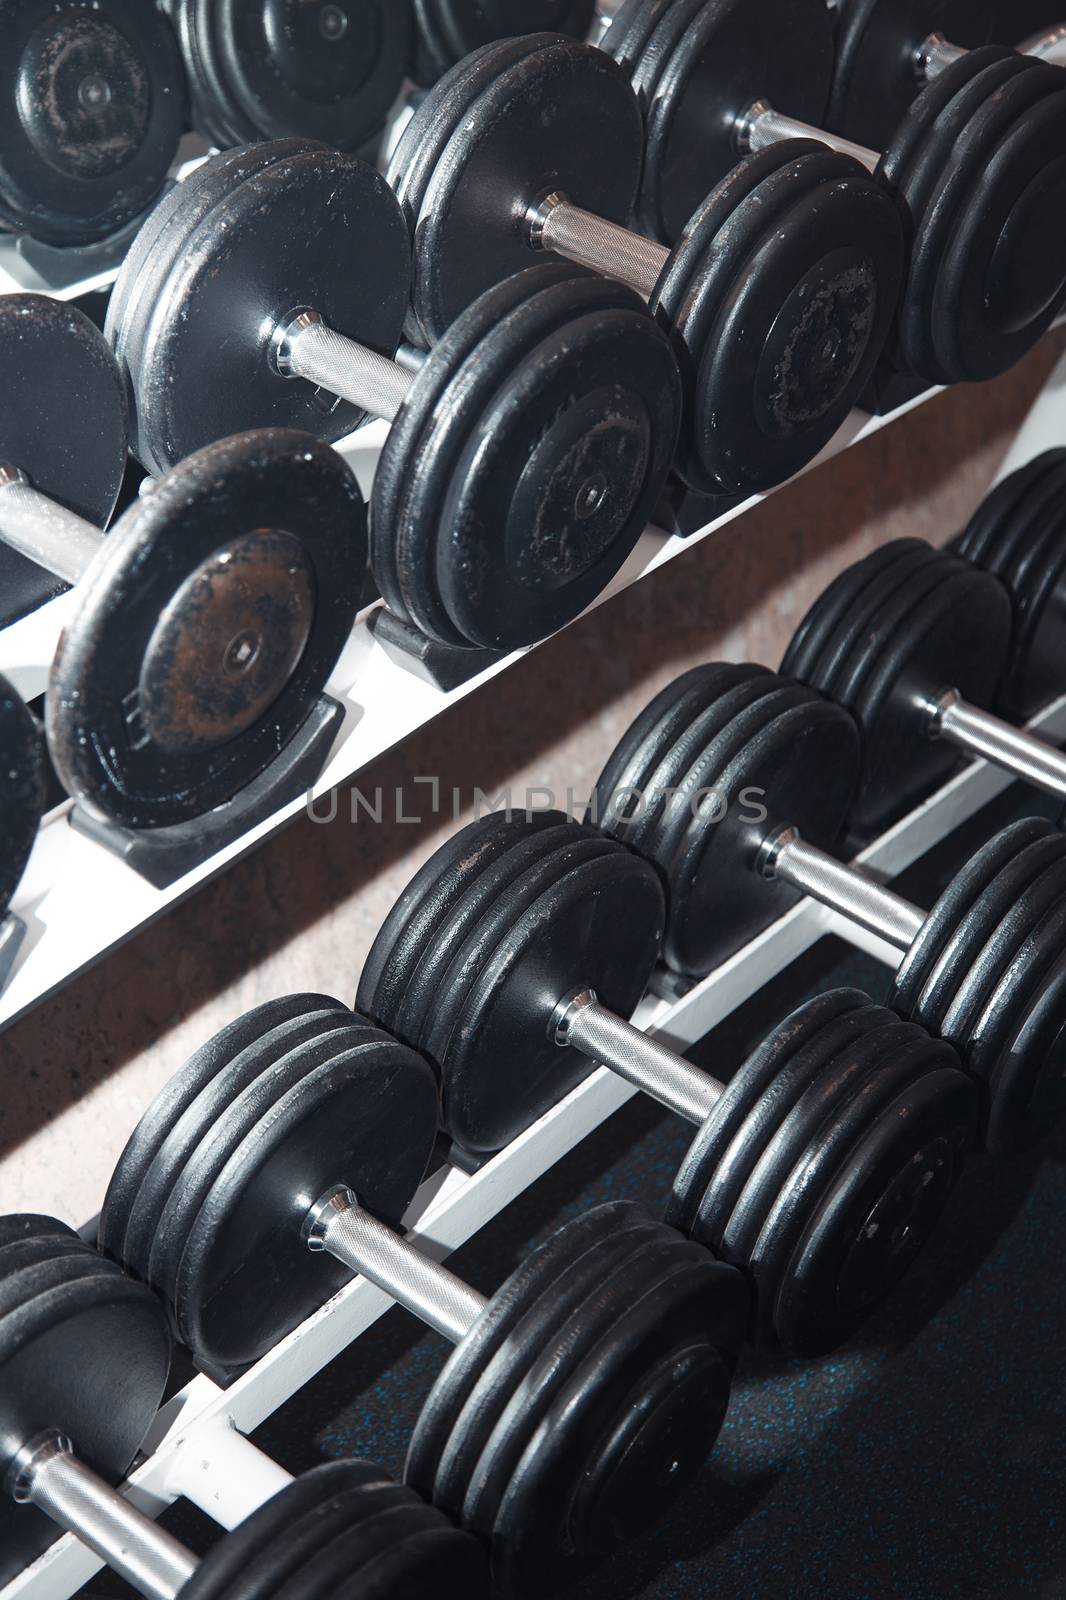 Group of barbells arranged in row at the gym. Vertical photo